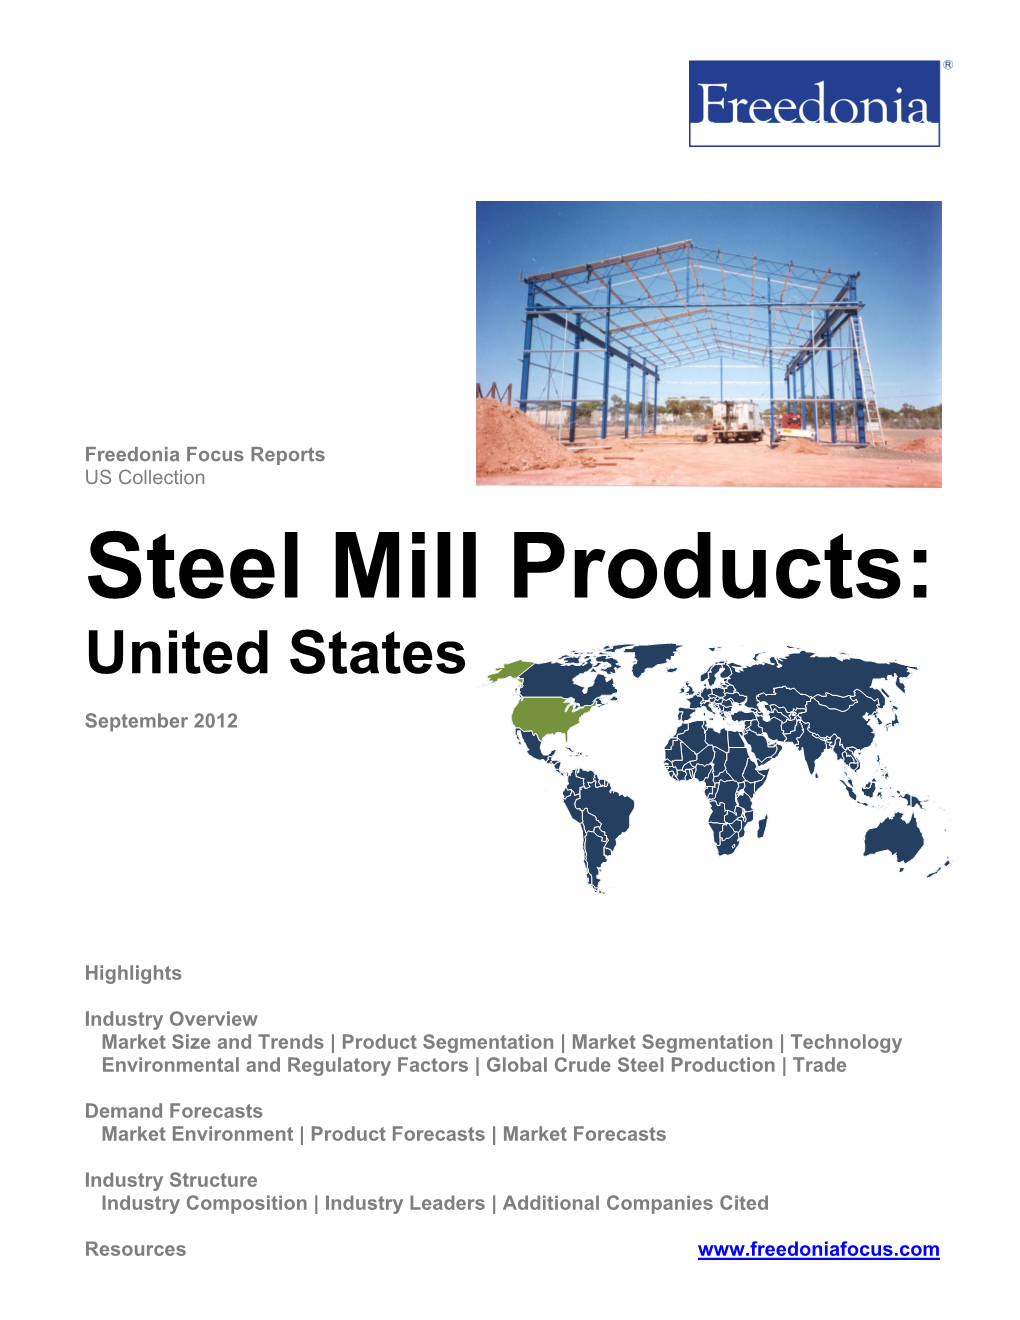 Steel Mill Products: United States